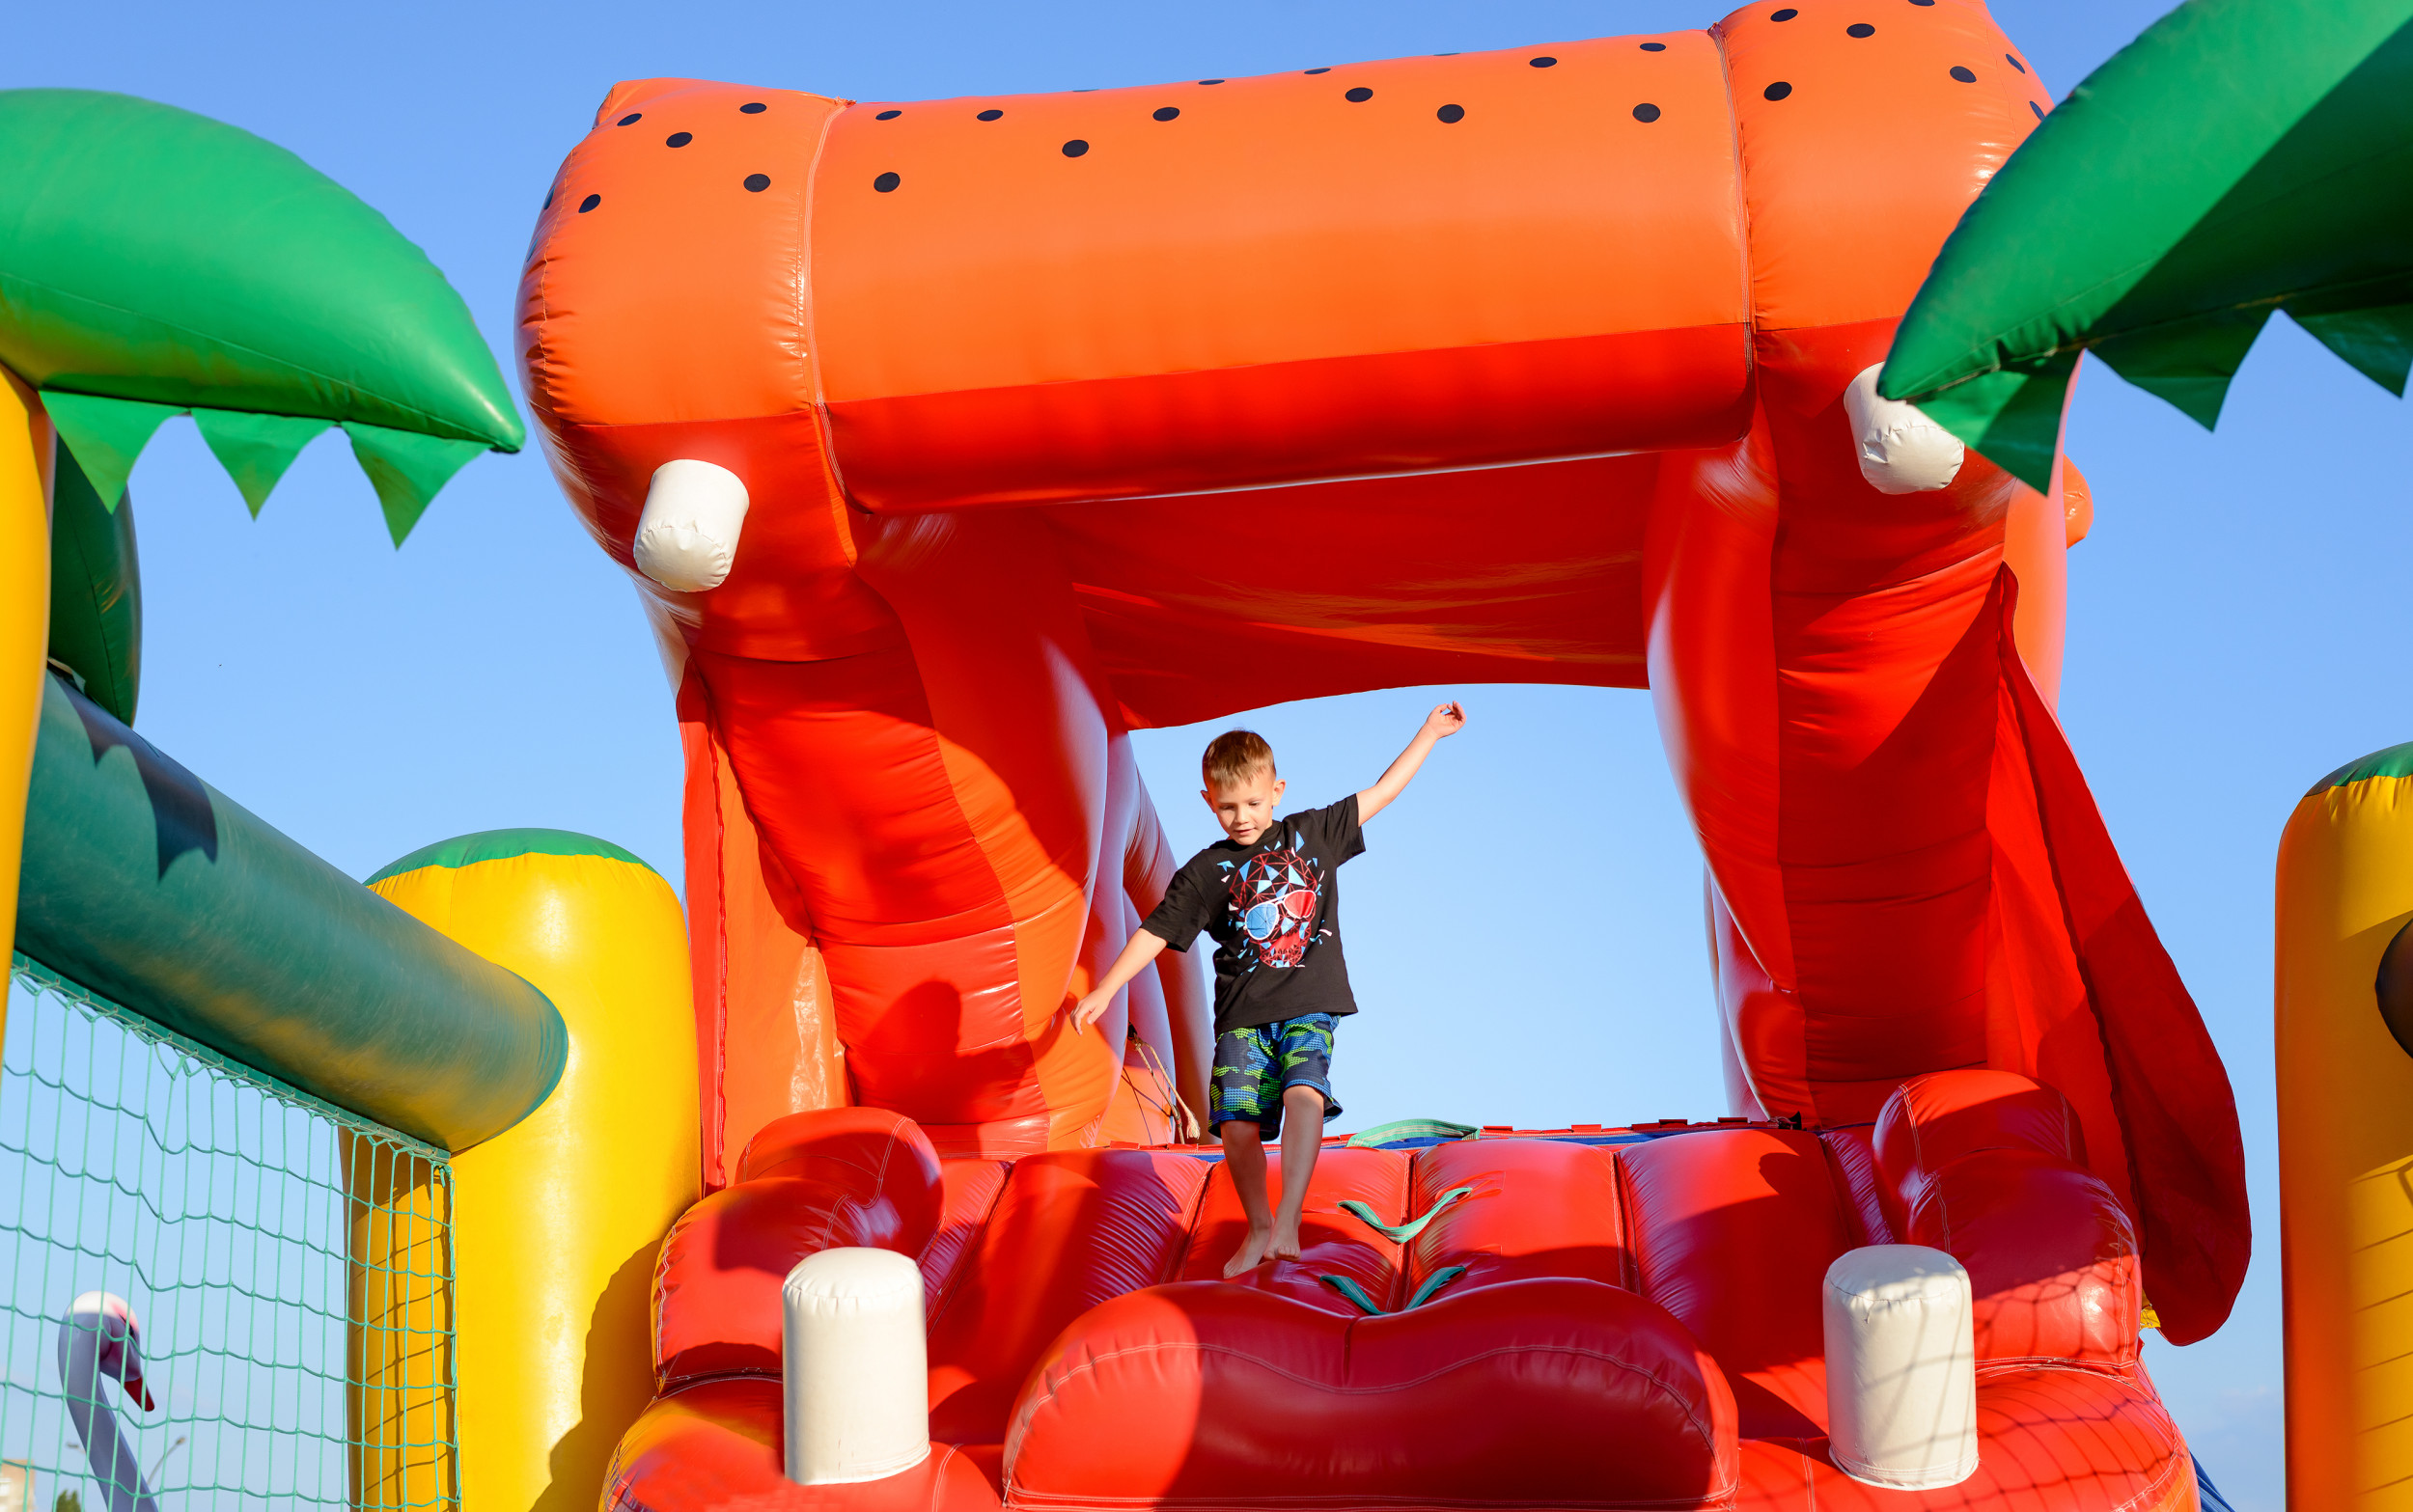 Neighbor Backed for Not Inviting 'Screaming' Girl To Bounce House Party